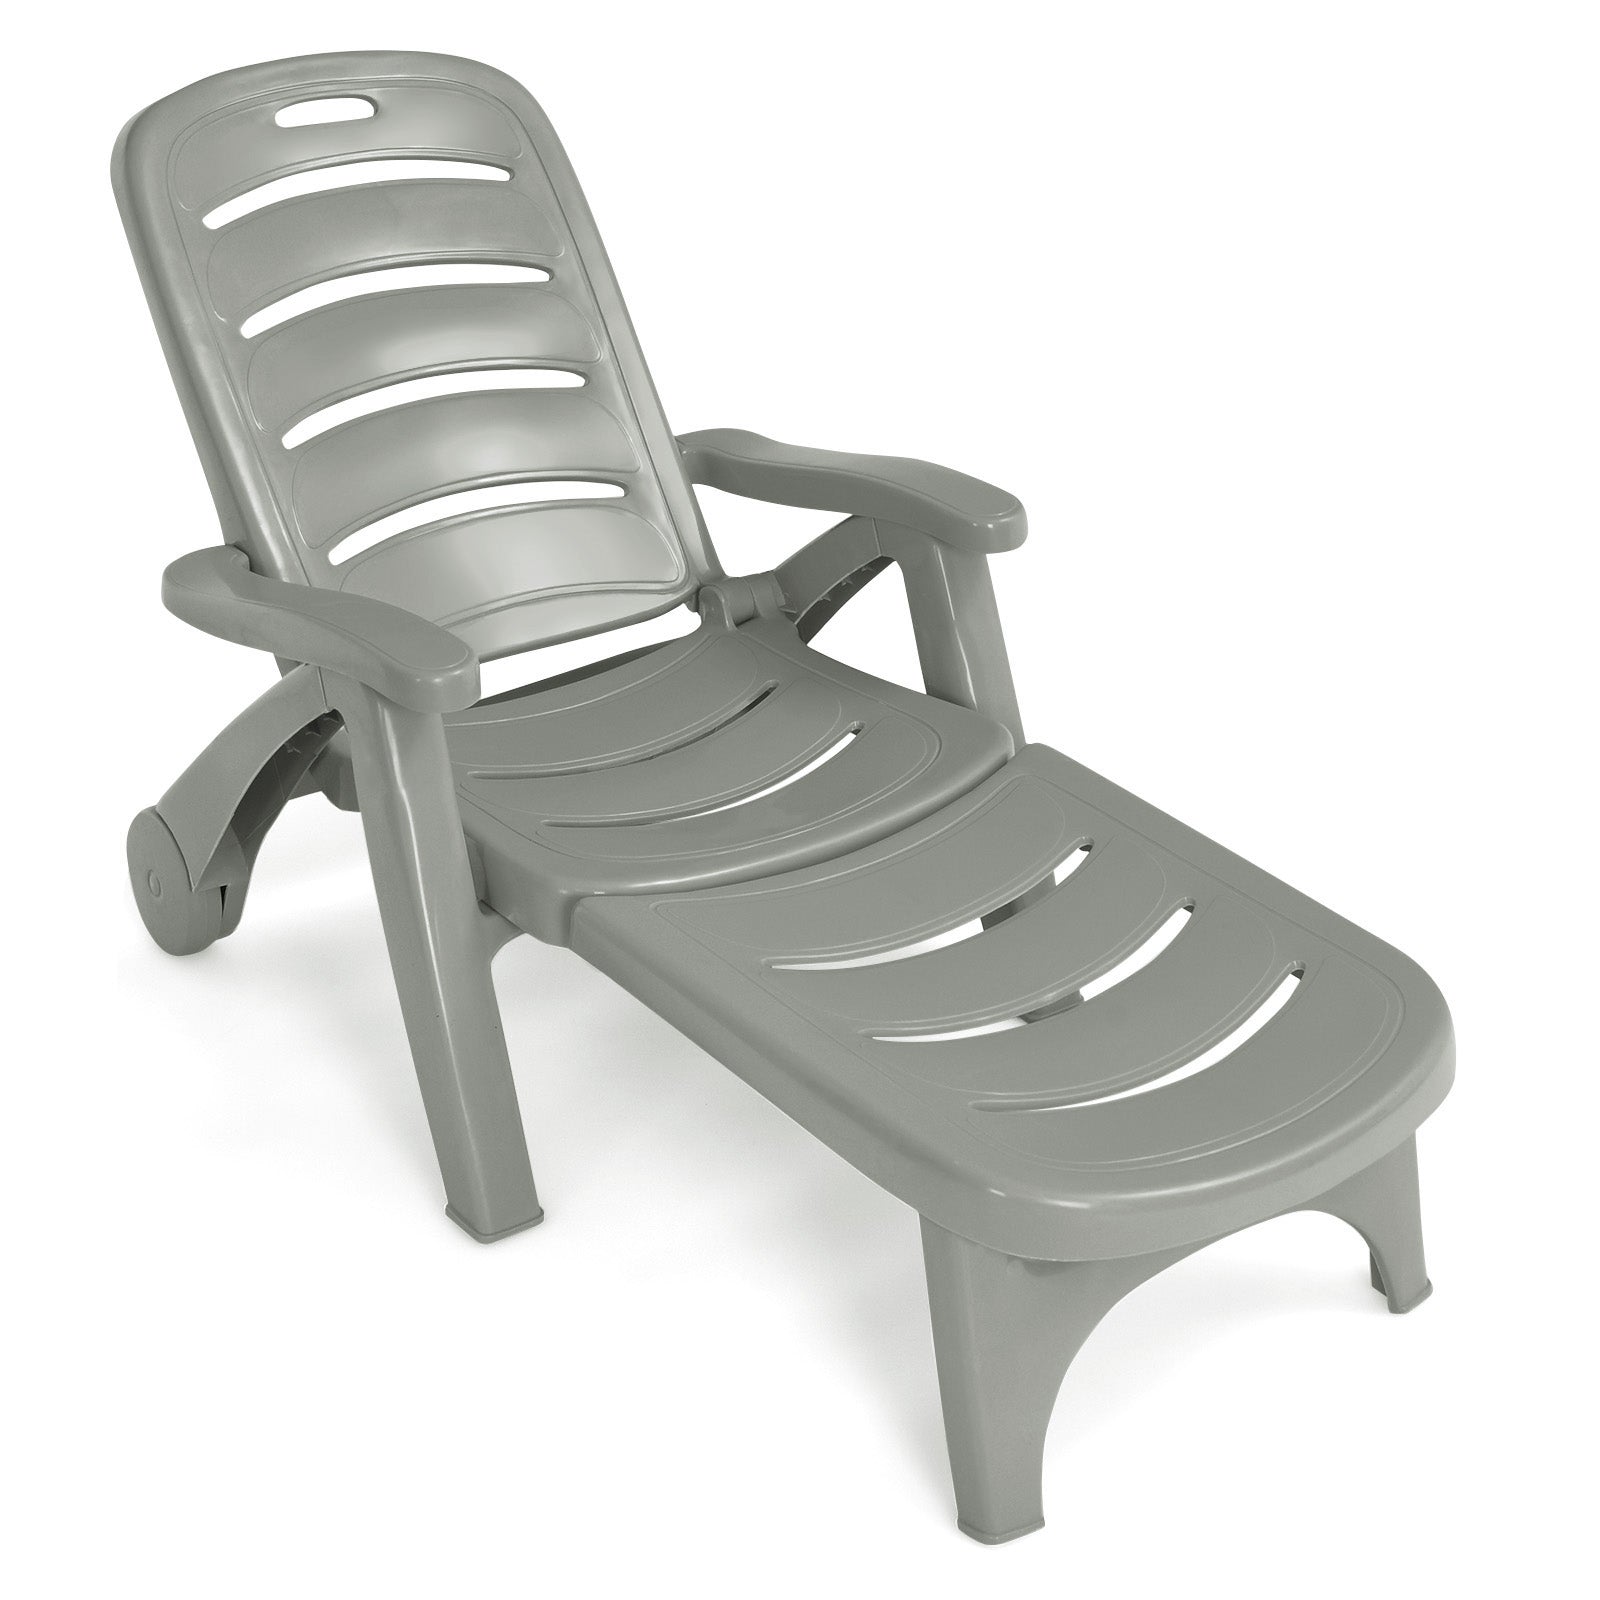 Adjustable Chaise Lounge Chair with Built-In Wheels-Grey